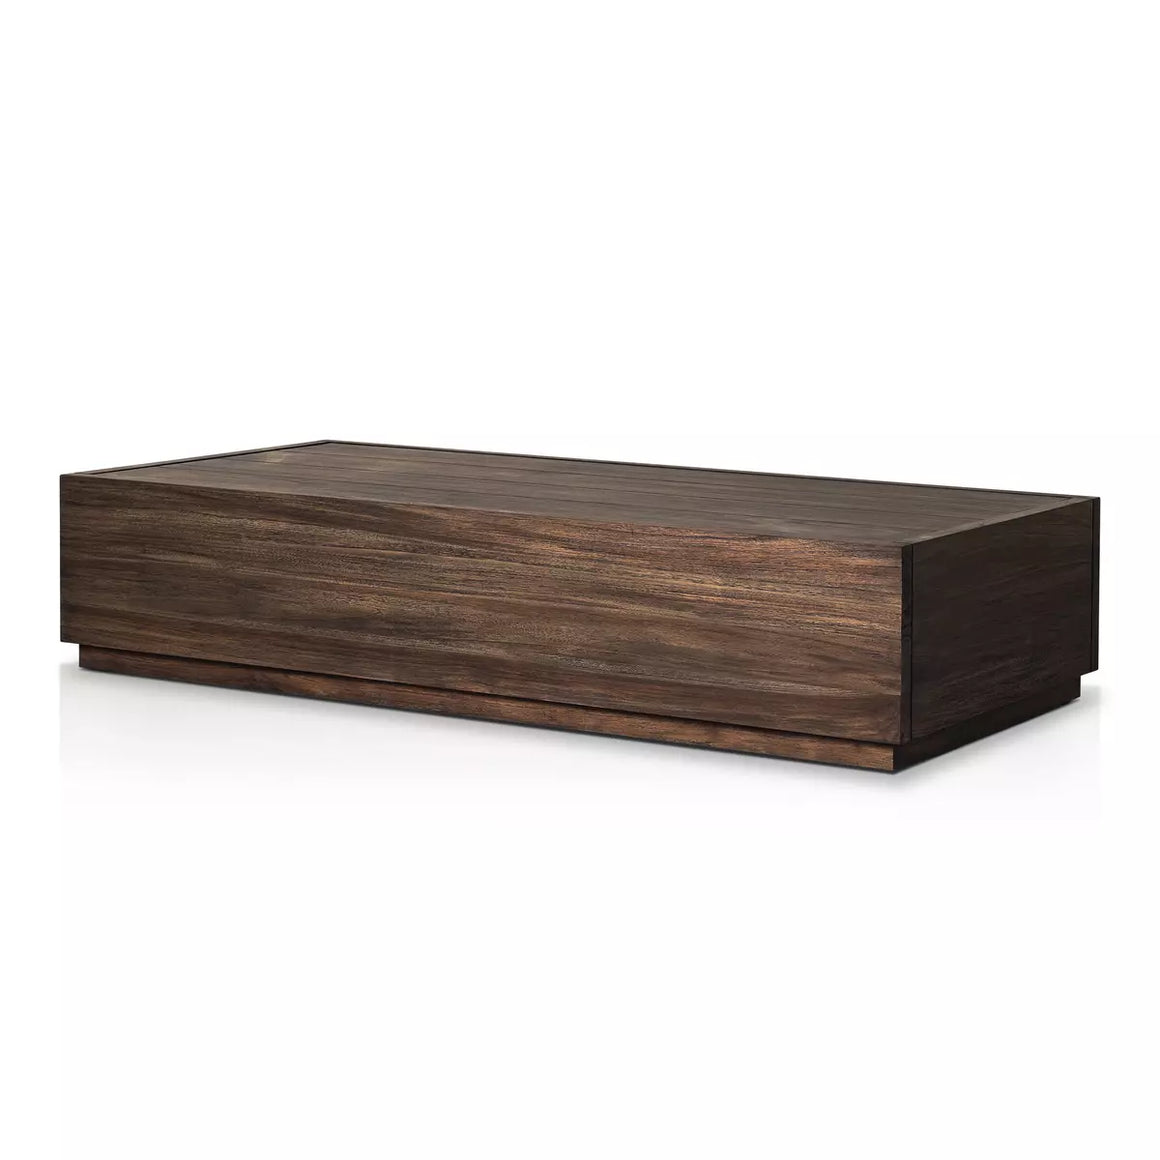 Messo Outdoor Coffee Table 70" - Stained Saddle Brown FSC